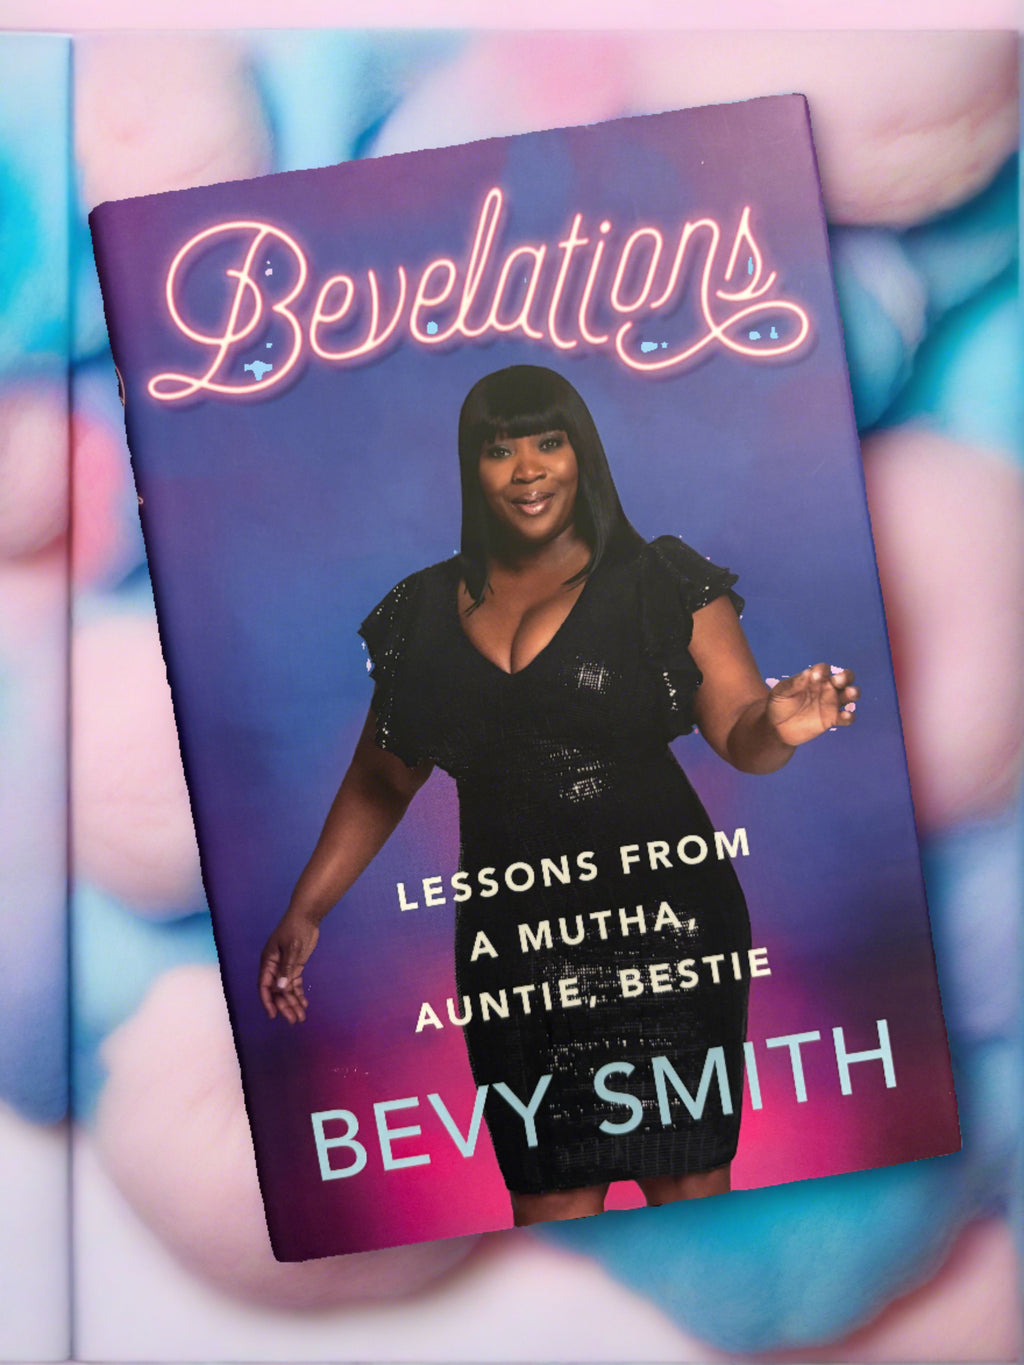 Bevelations: Lessons from a Mutha, Auntie, Bestie- By Bevy Smith